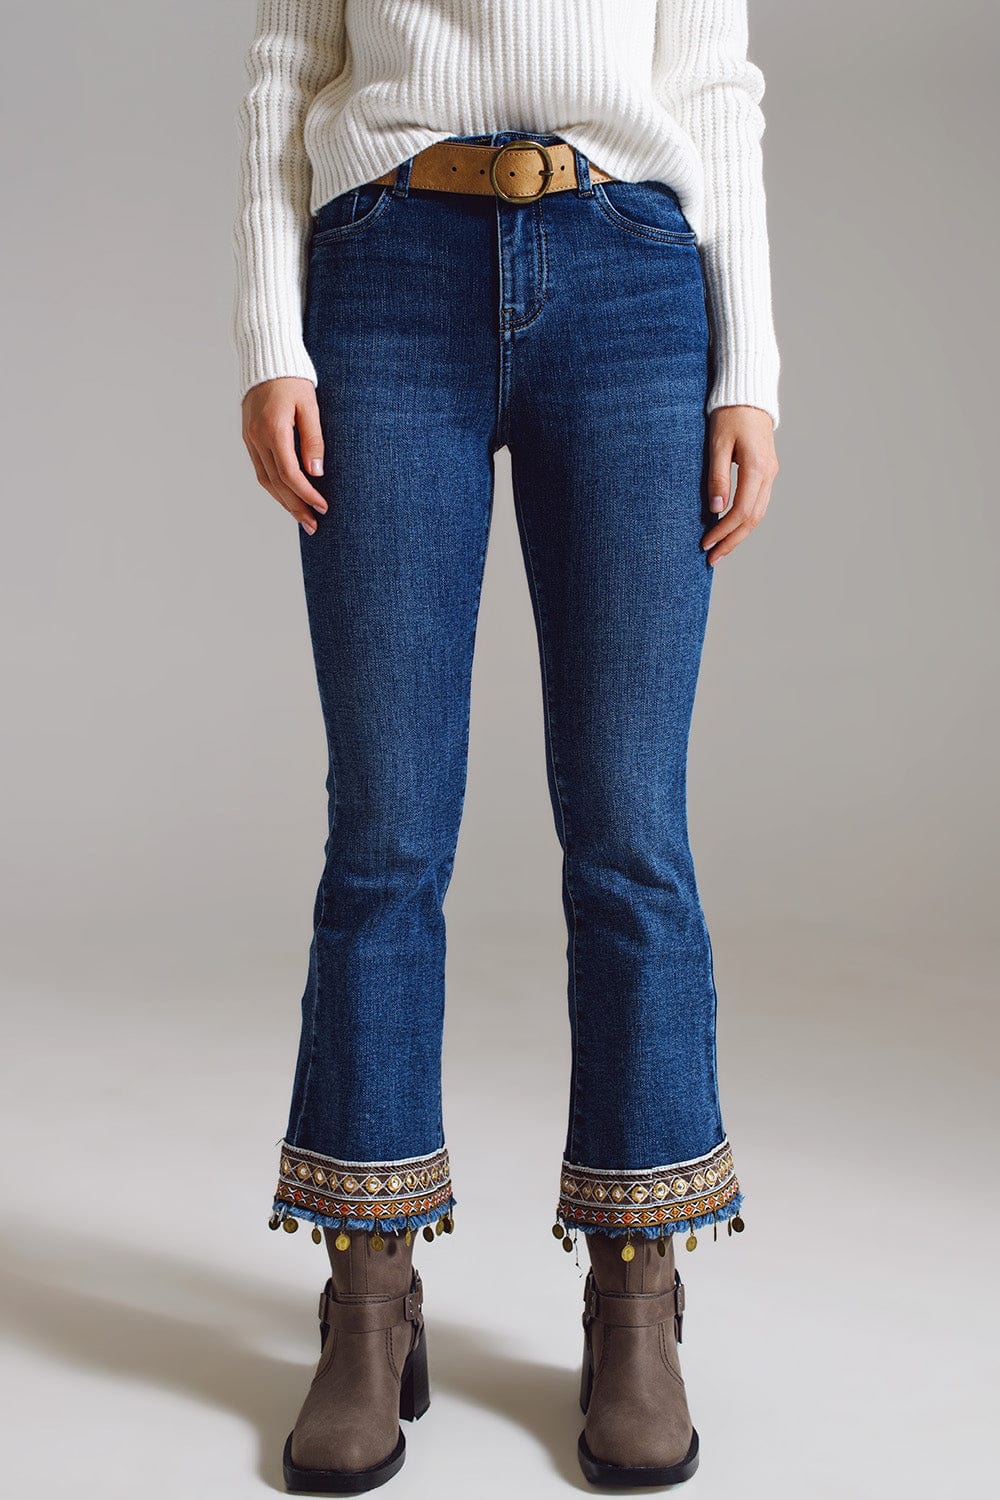 Q2 Women's Jean Flare Jeans With Embellished Hem